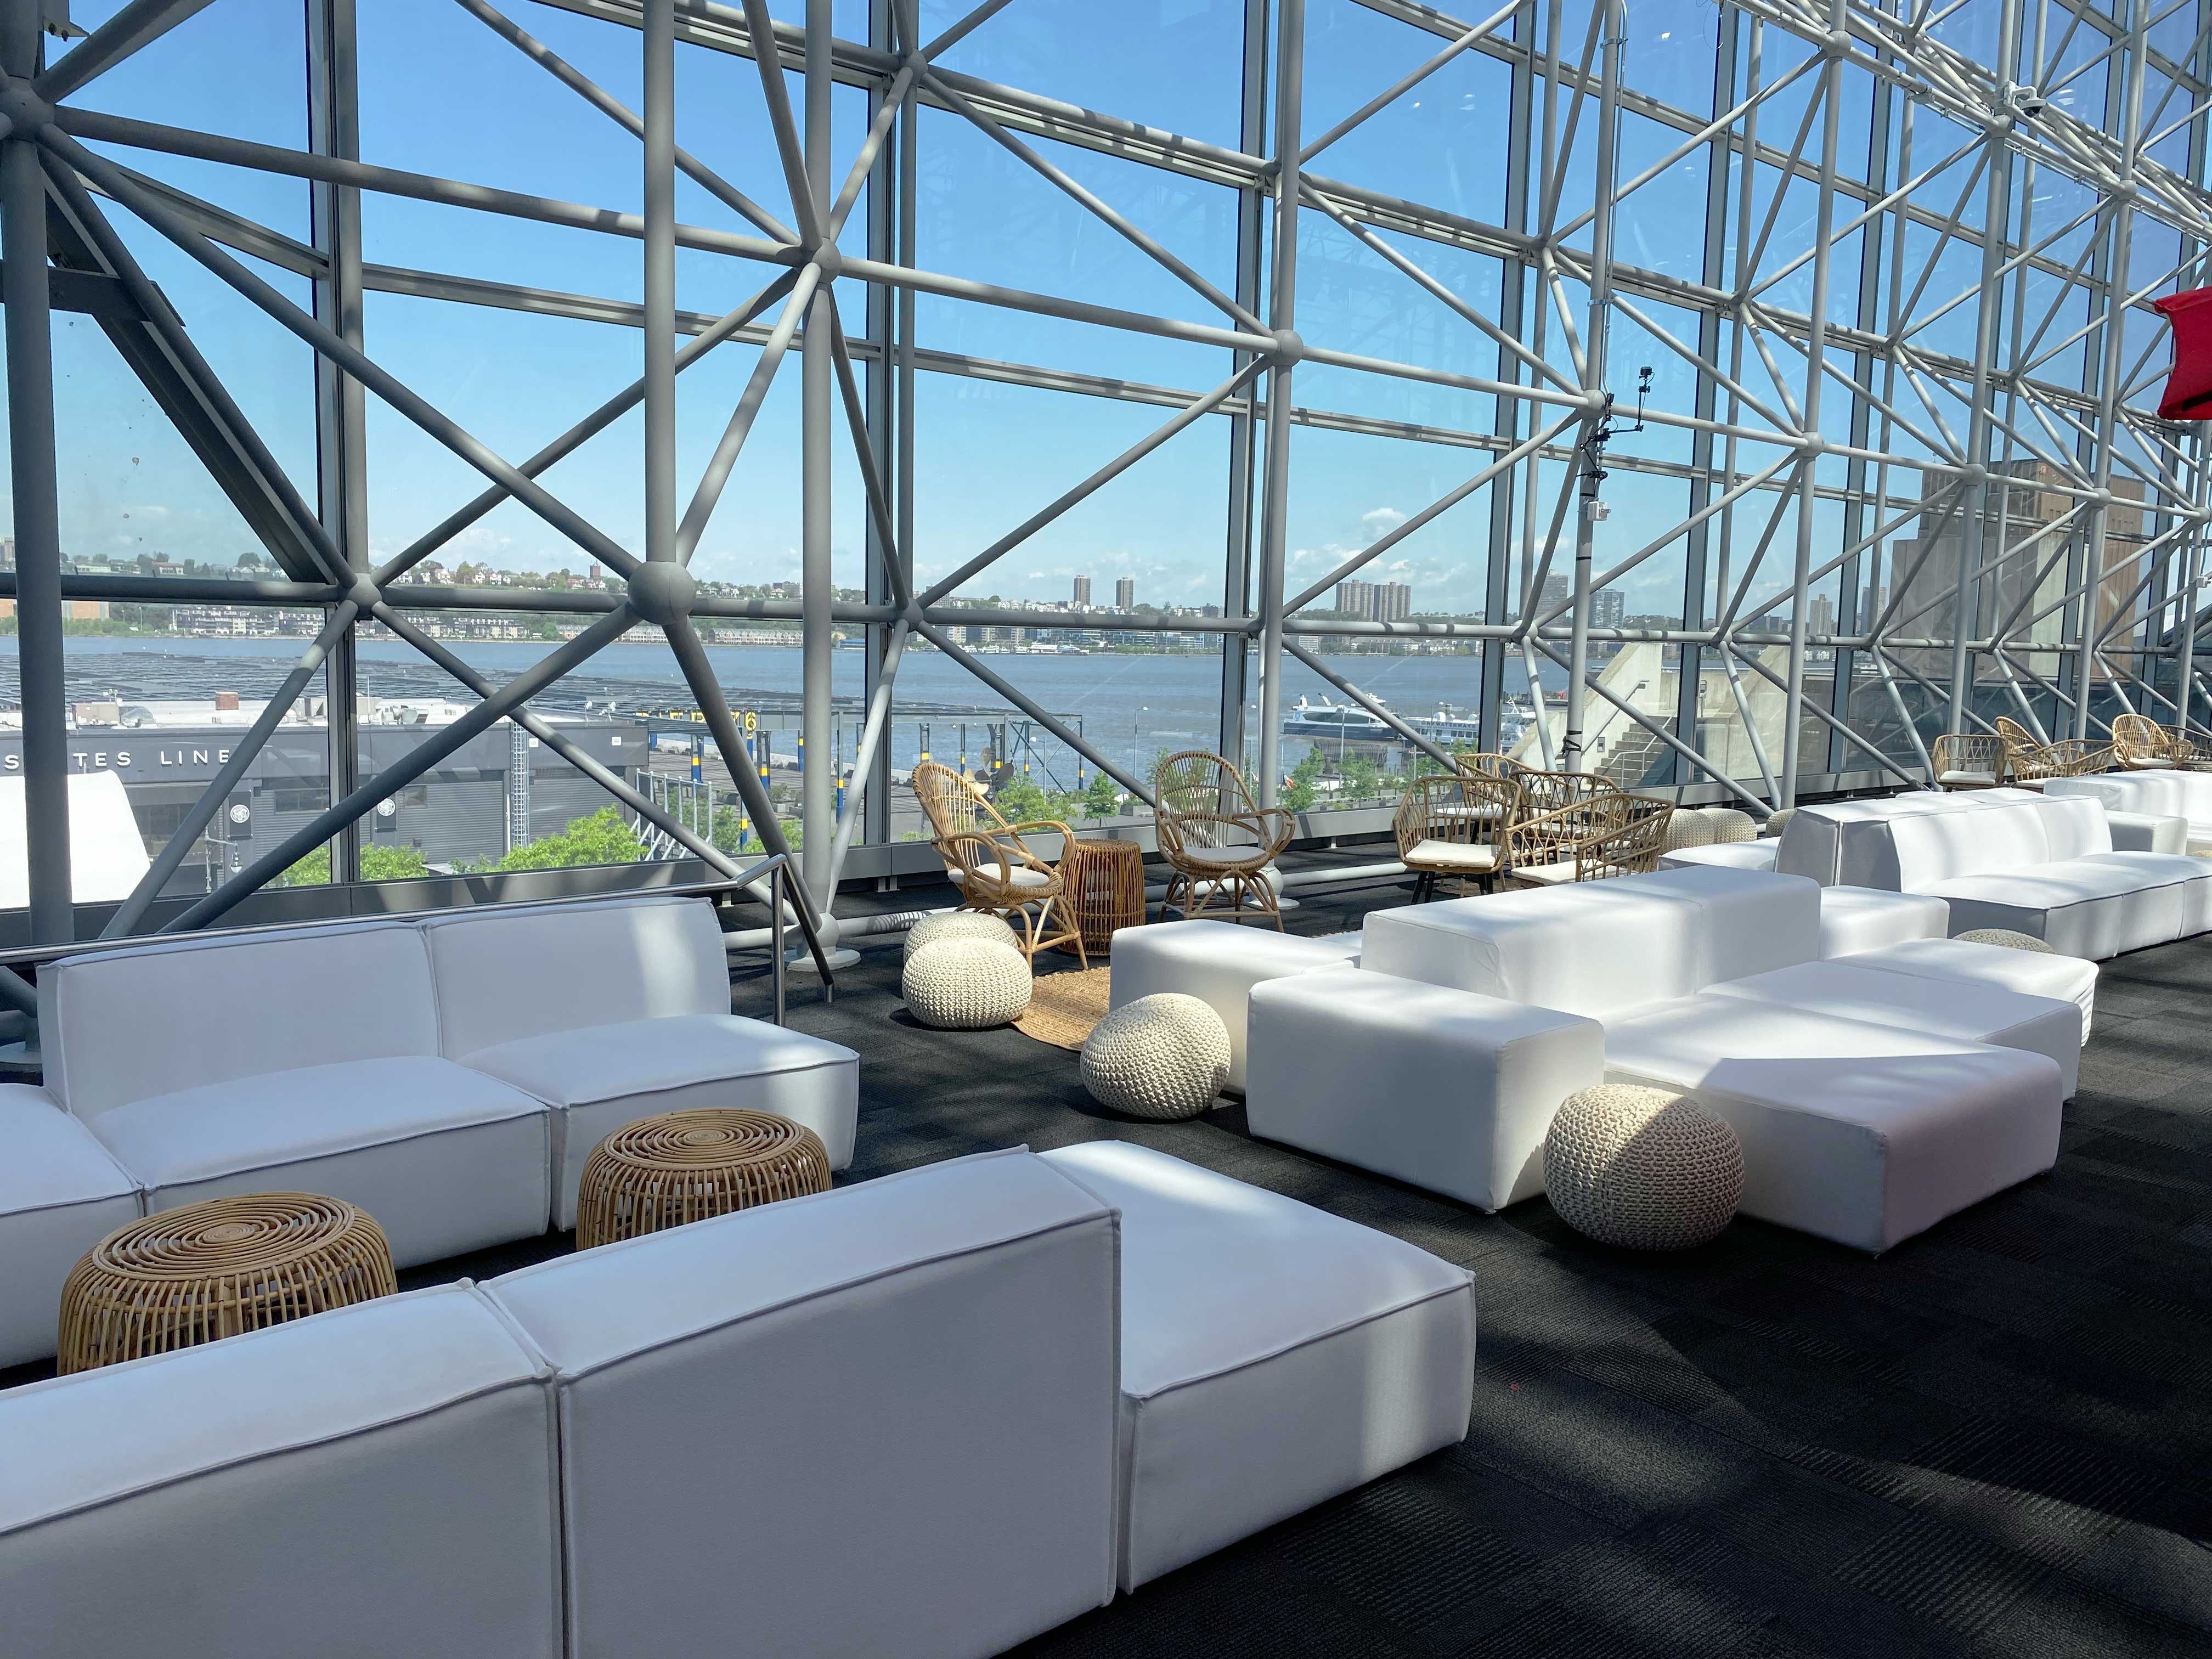 White couches in front of see through glass panels with blue sky.